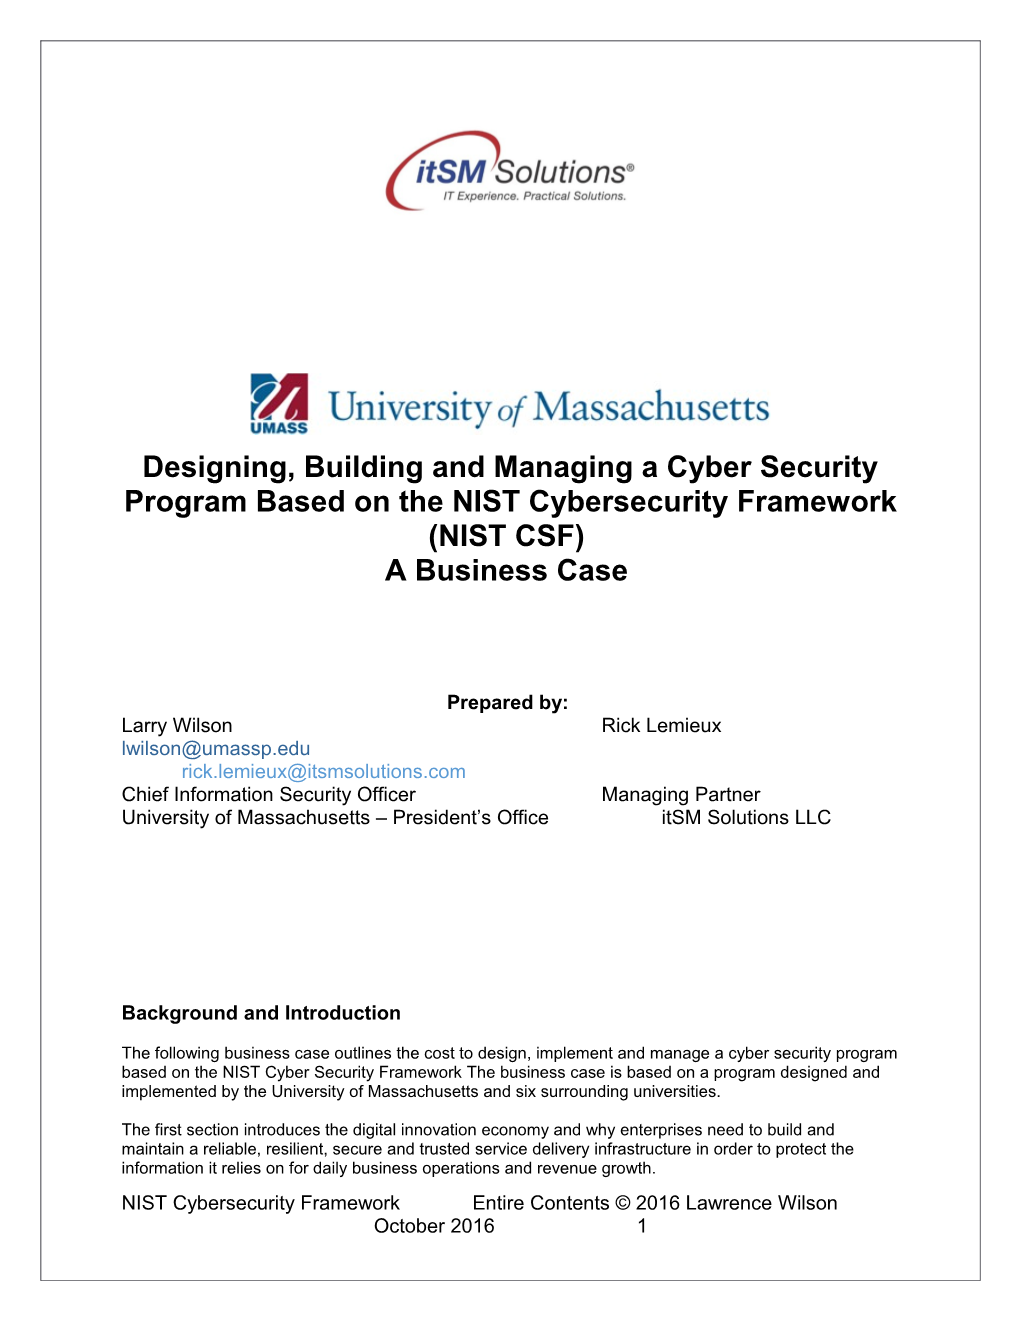 Designing, Building and Managing a Cyber Security Program Based on the NIST Cybersecurity